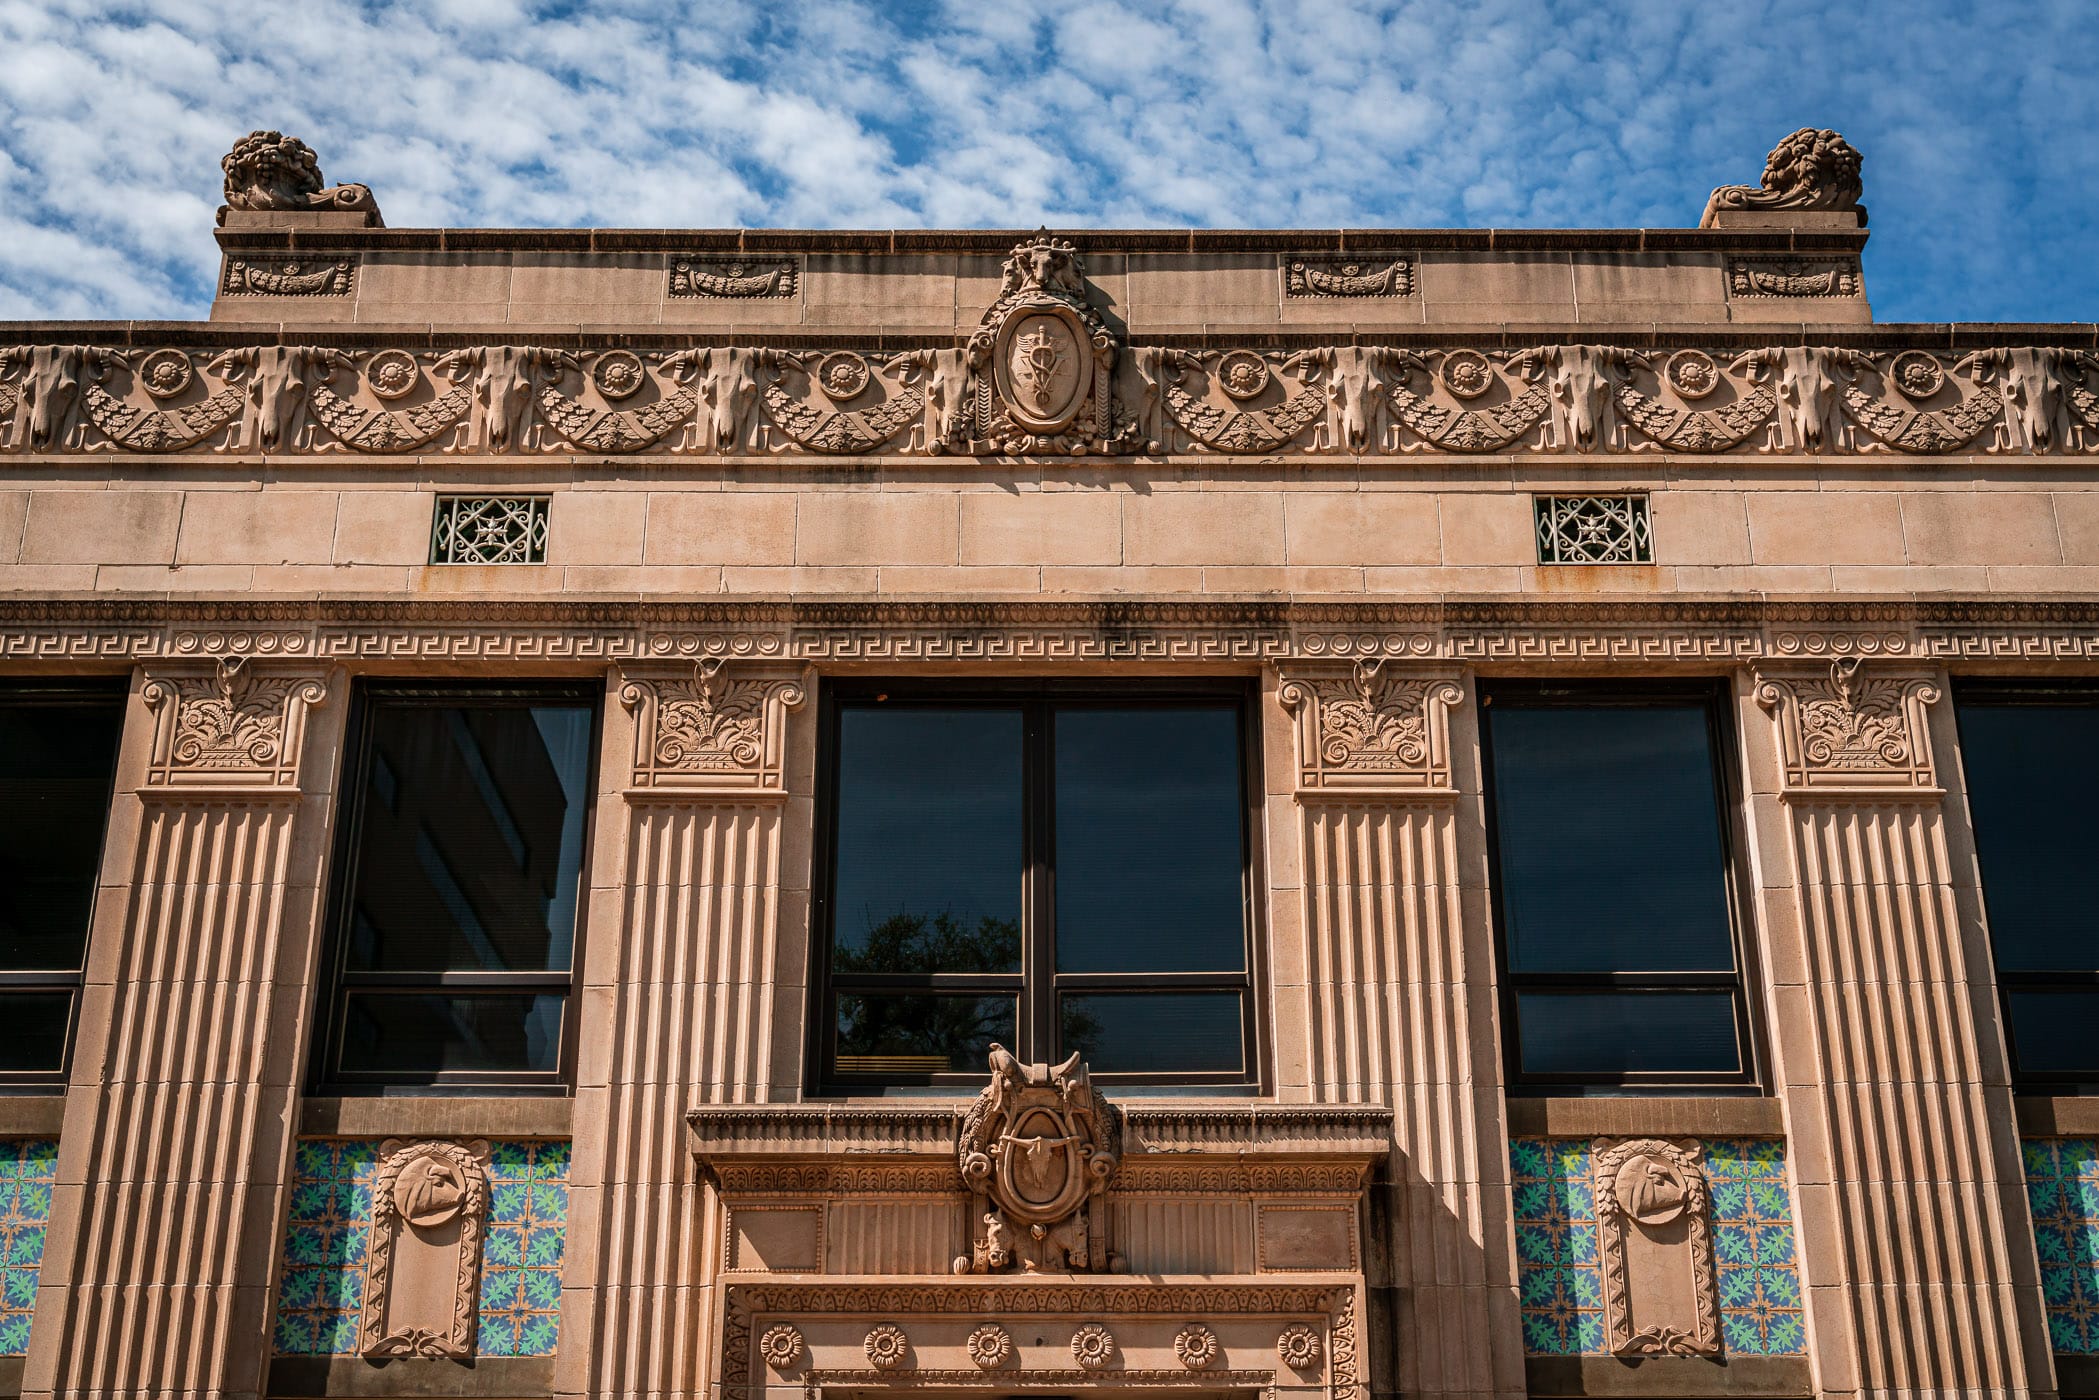 Architectural detail of the Haynes Engineering Building—originally built as a veterinary hospital in 1932—at Texas A&M University, College Station, Texas.